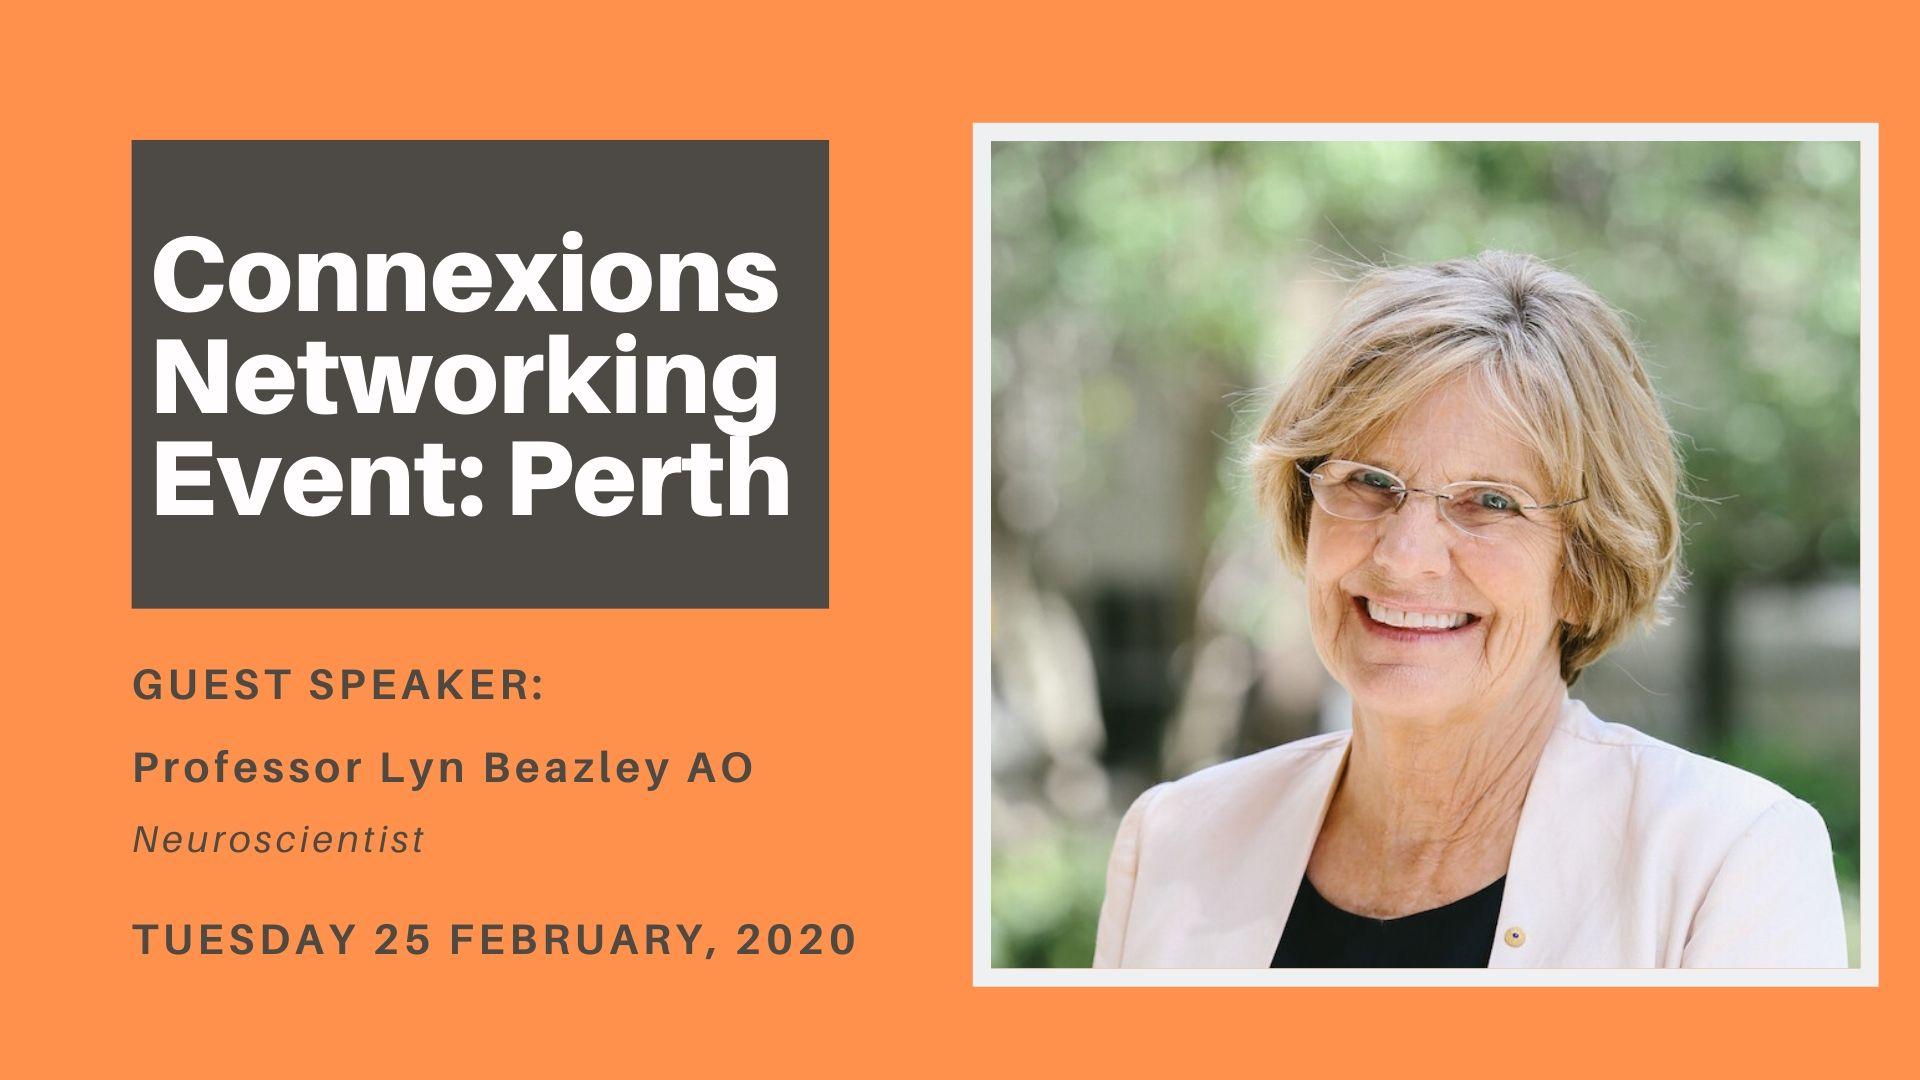 Perth Connexions - Networking for Business Women - Tuesday 25 February 2020